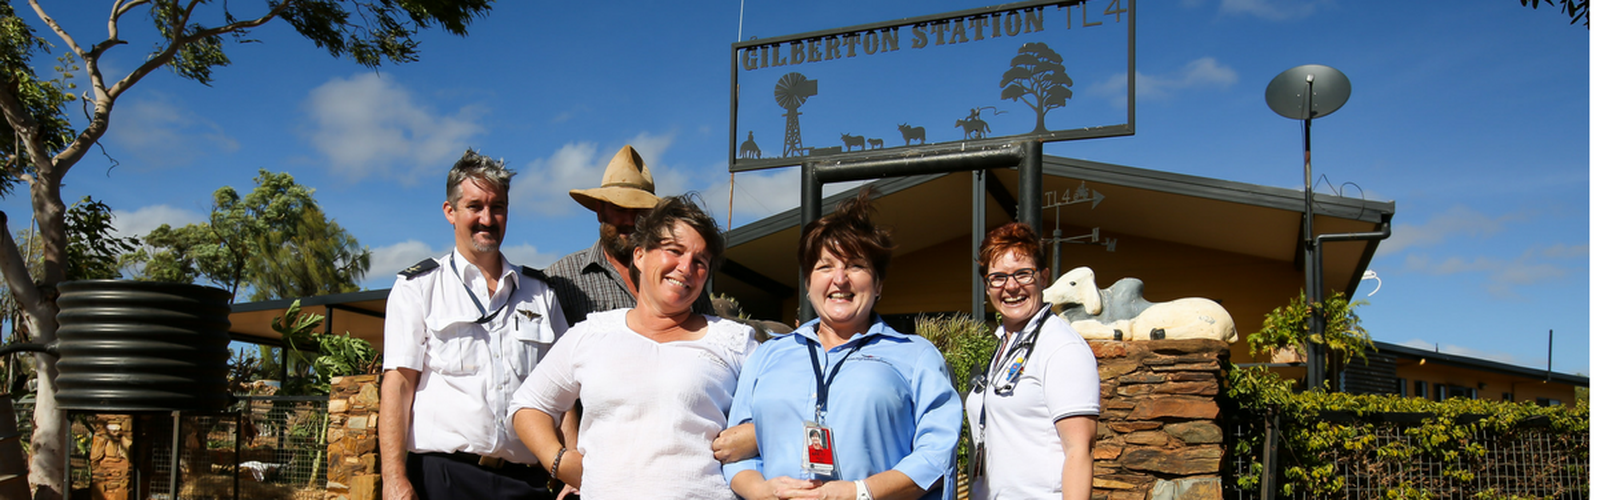 Share your story with the RFDS and make a difference